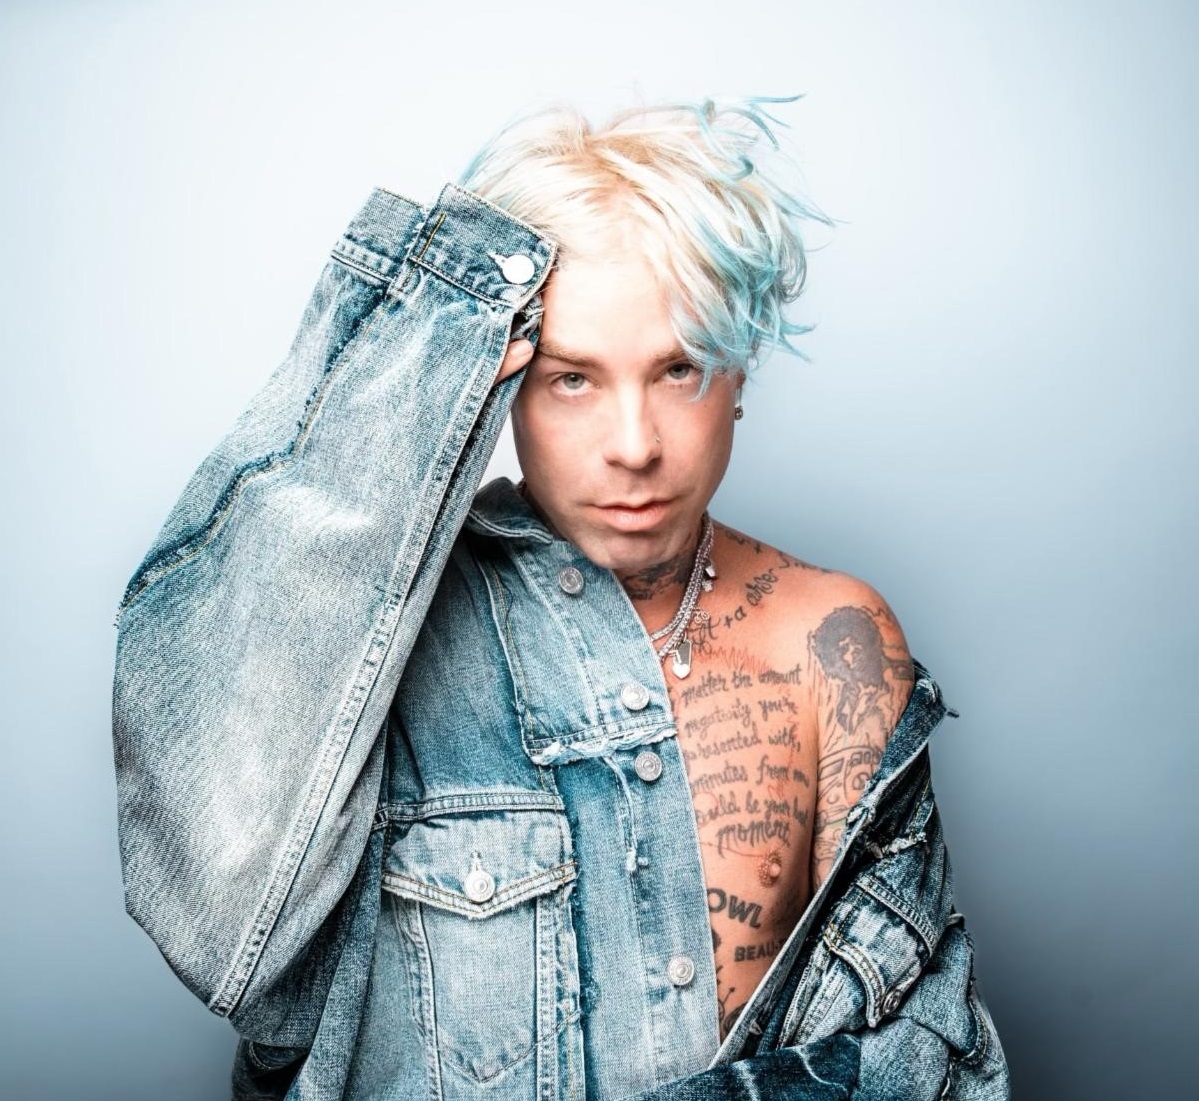 Mod Sun Shares New Album 'God Save The Teen', Yours Truly, News, March 20, 2023